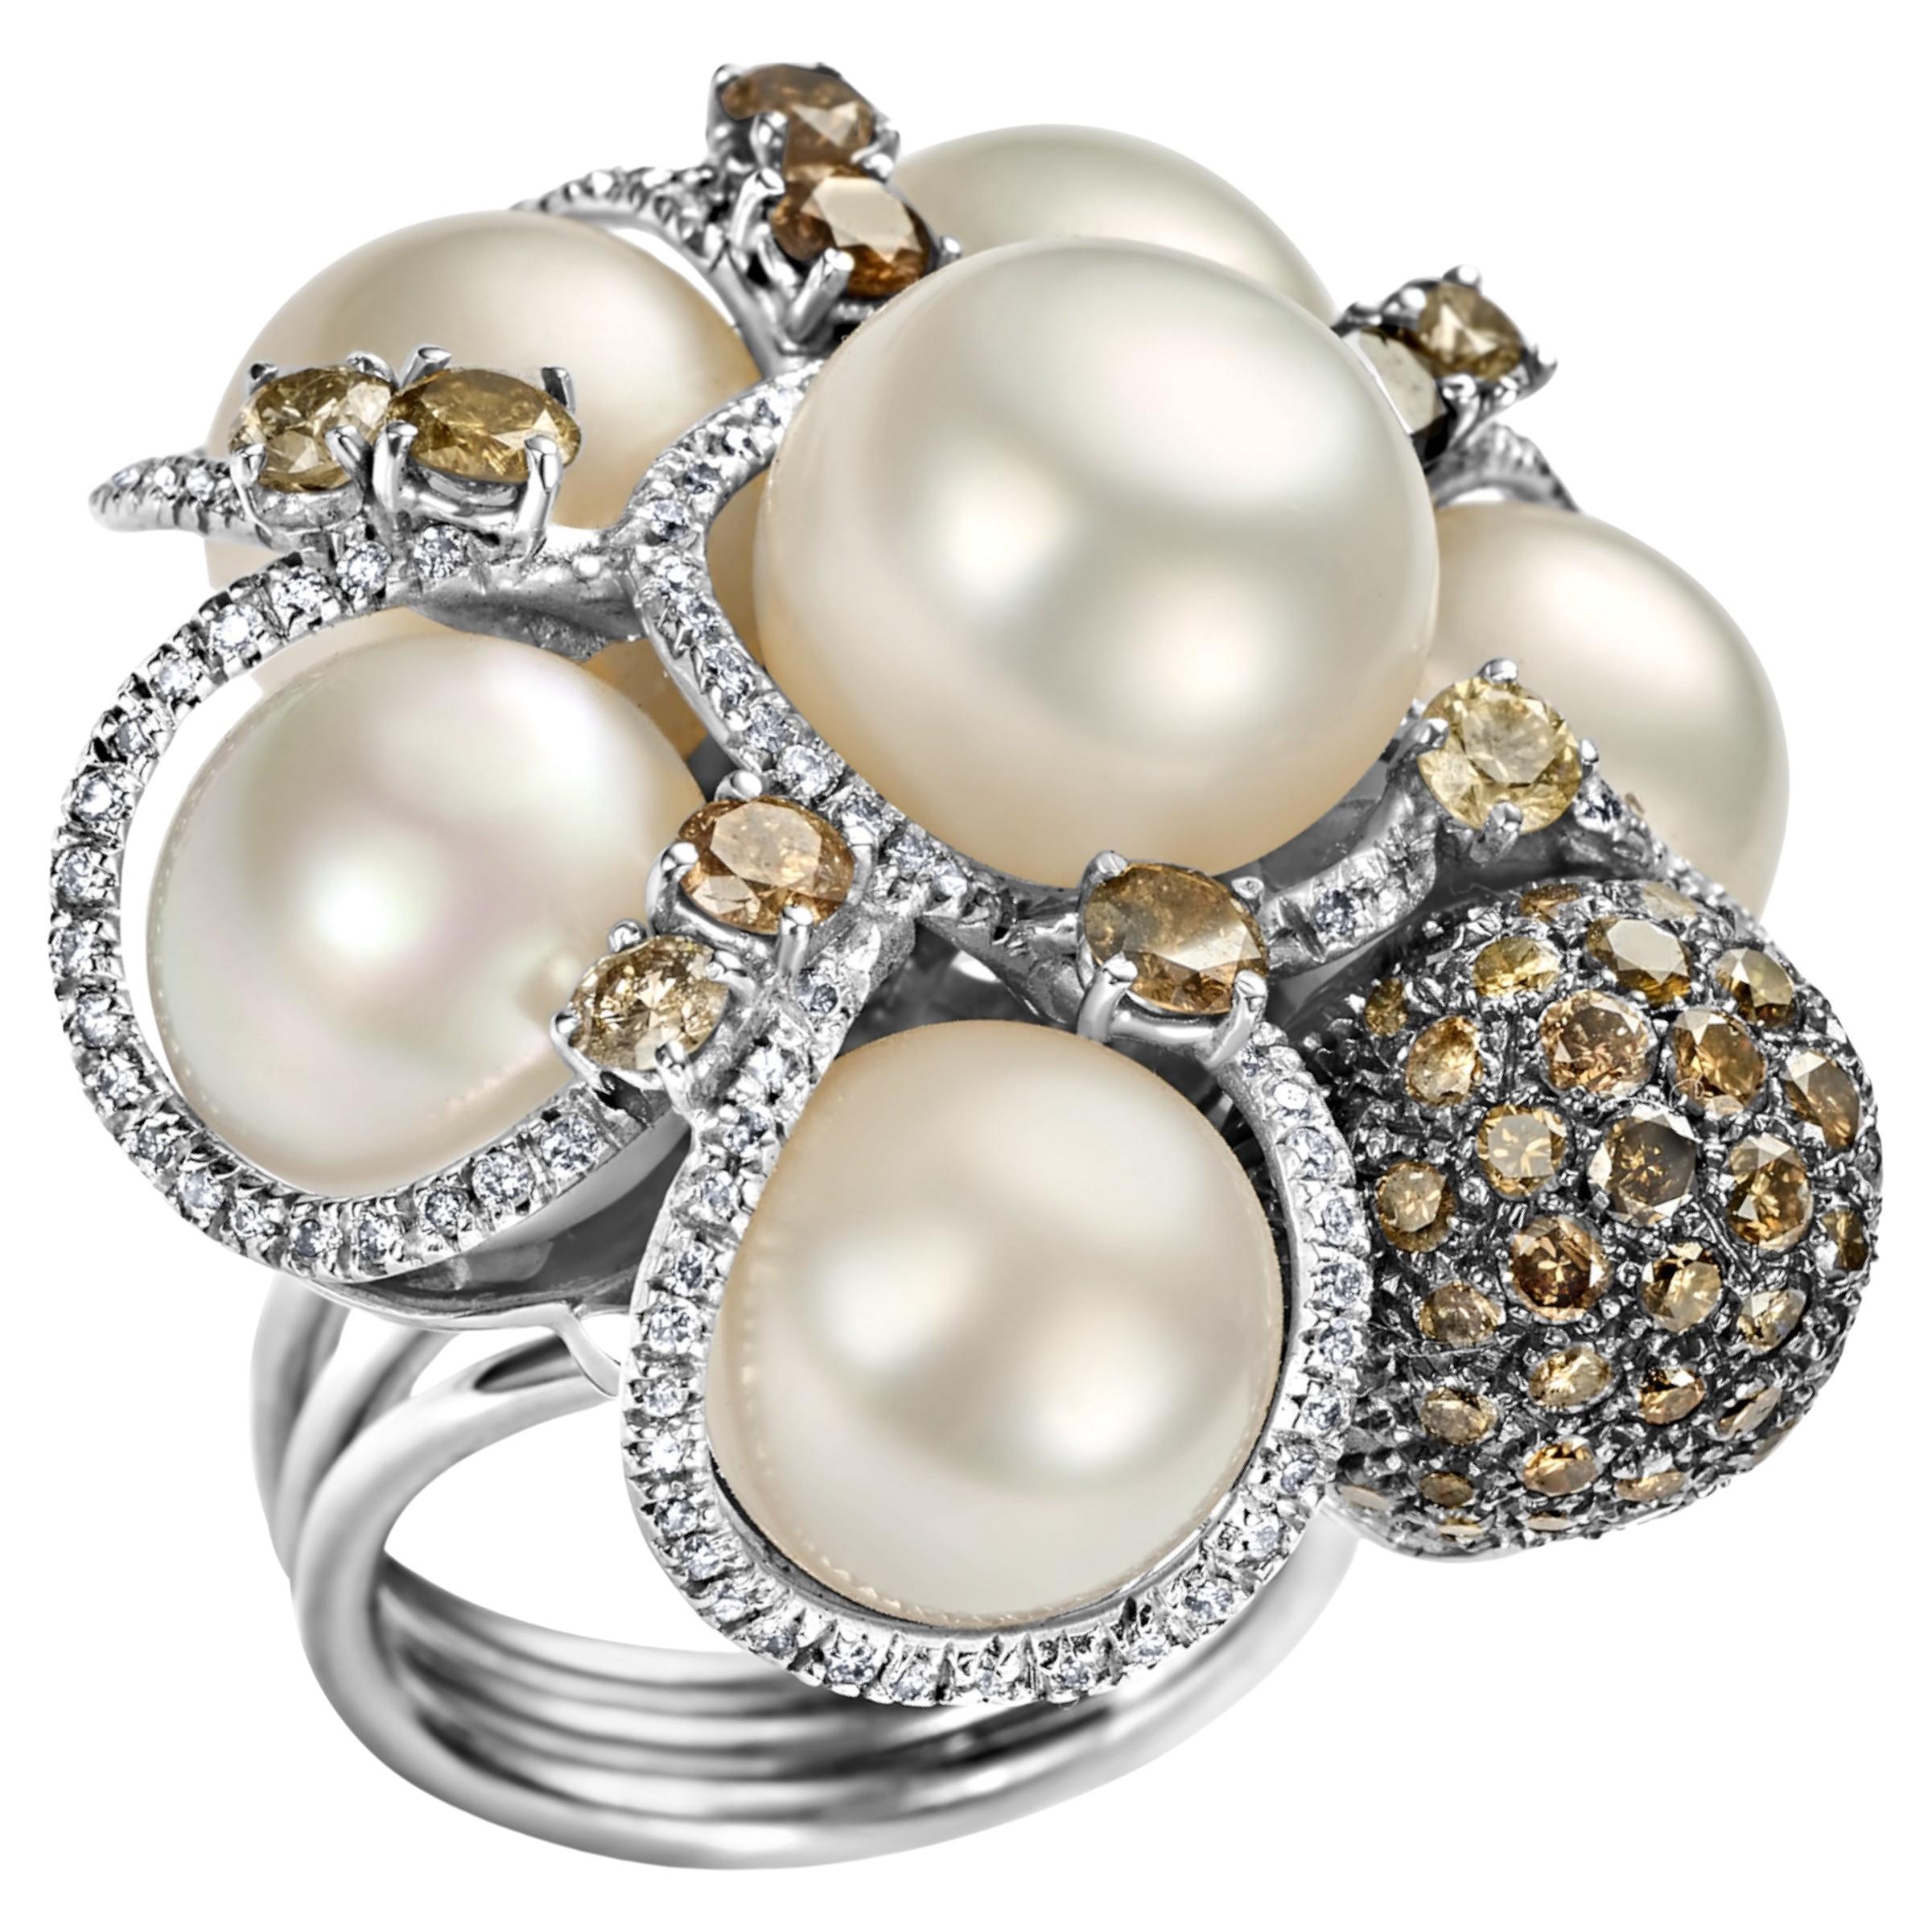 18kt White Gold Ring with 3.65ct Diamonds& Pearls, Can Purchase with Bracelet